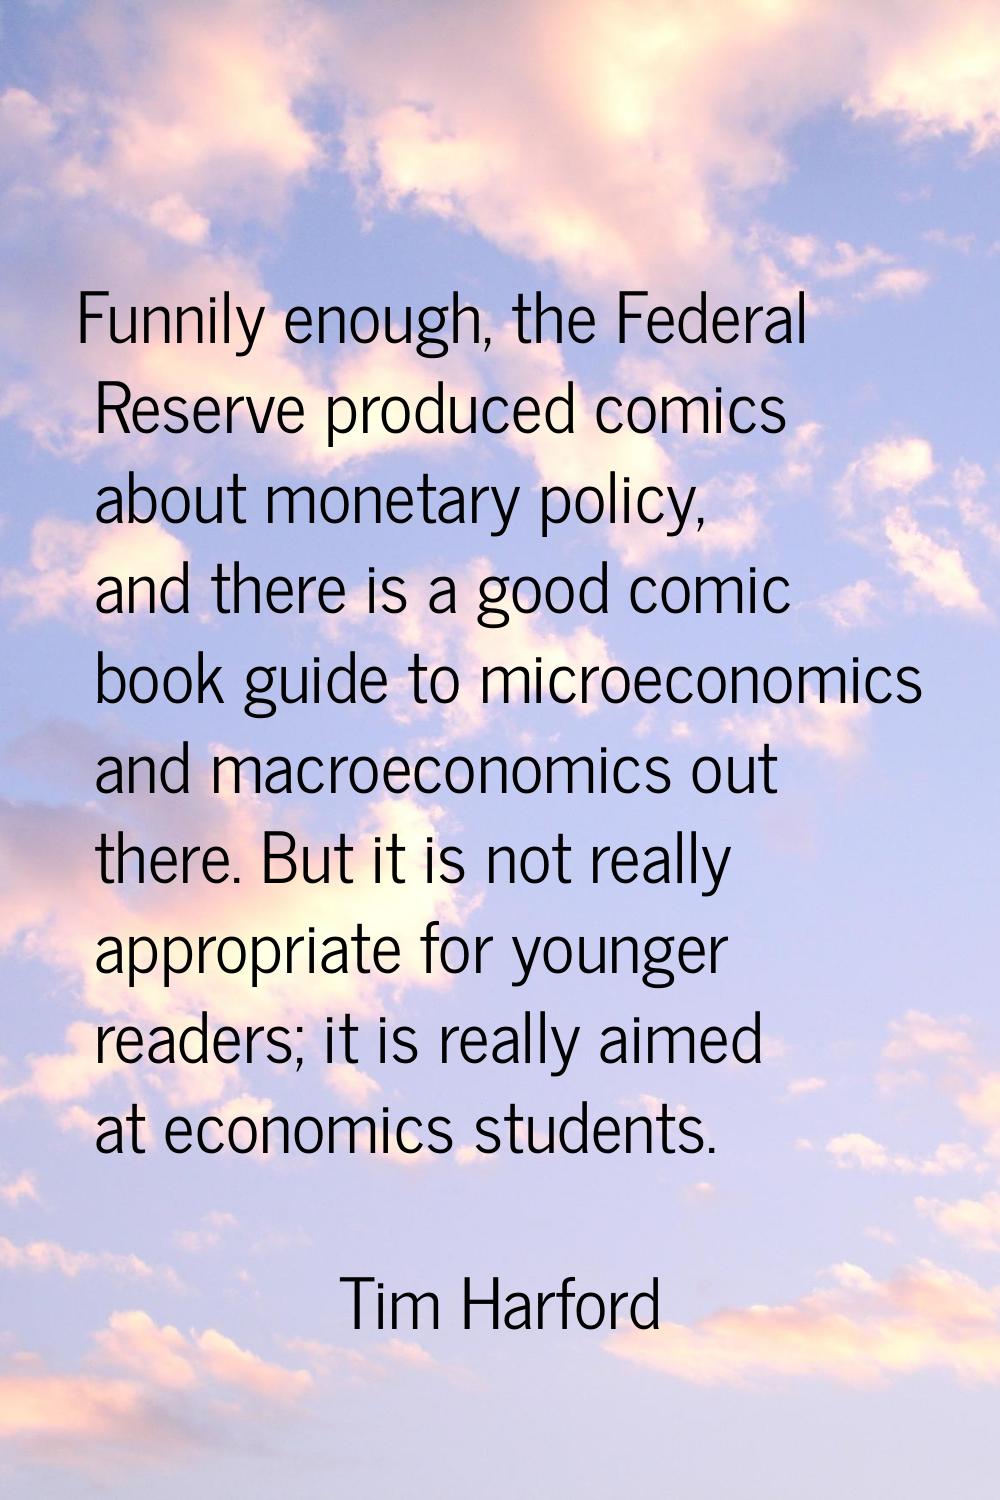 Funnily enough, the Federal Reserve produced comics about monetary policy, and there is a good comi